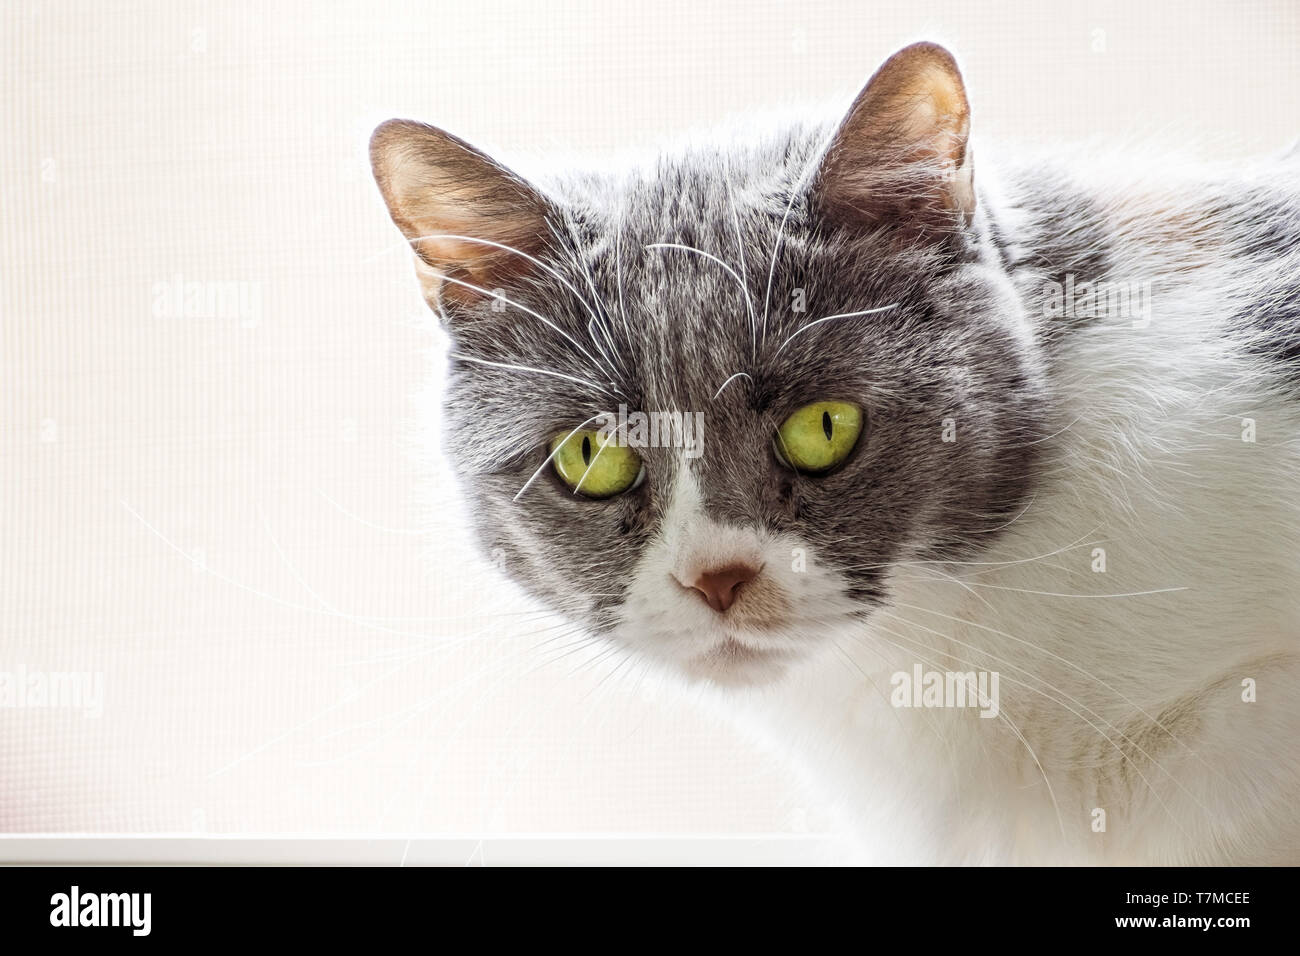 Close up of gray and white cat with green eyes, looking at the camera; light colored background Stock Photo